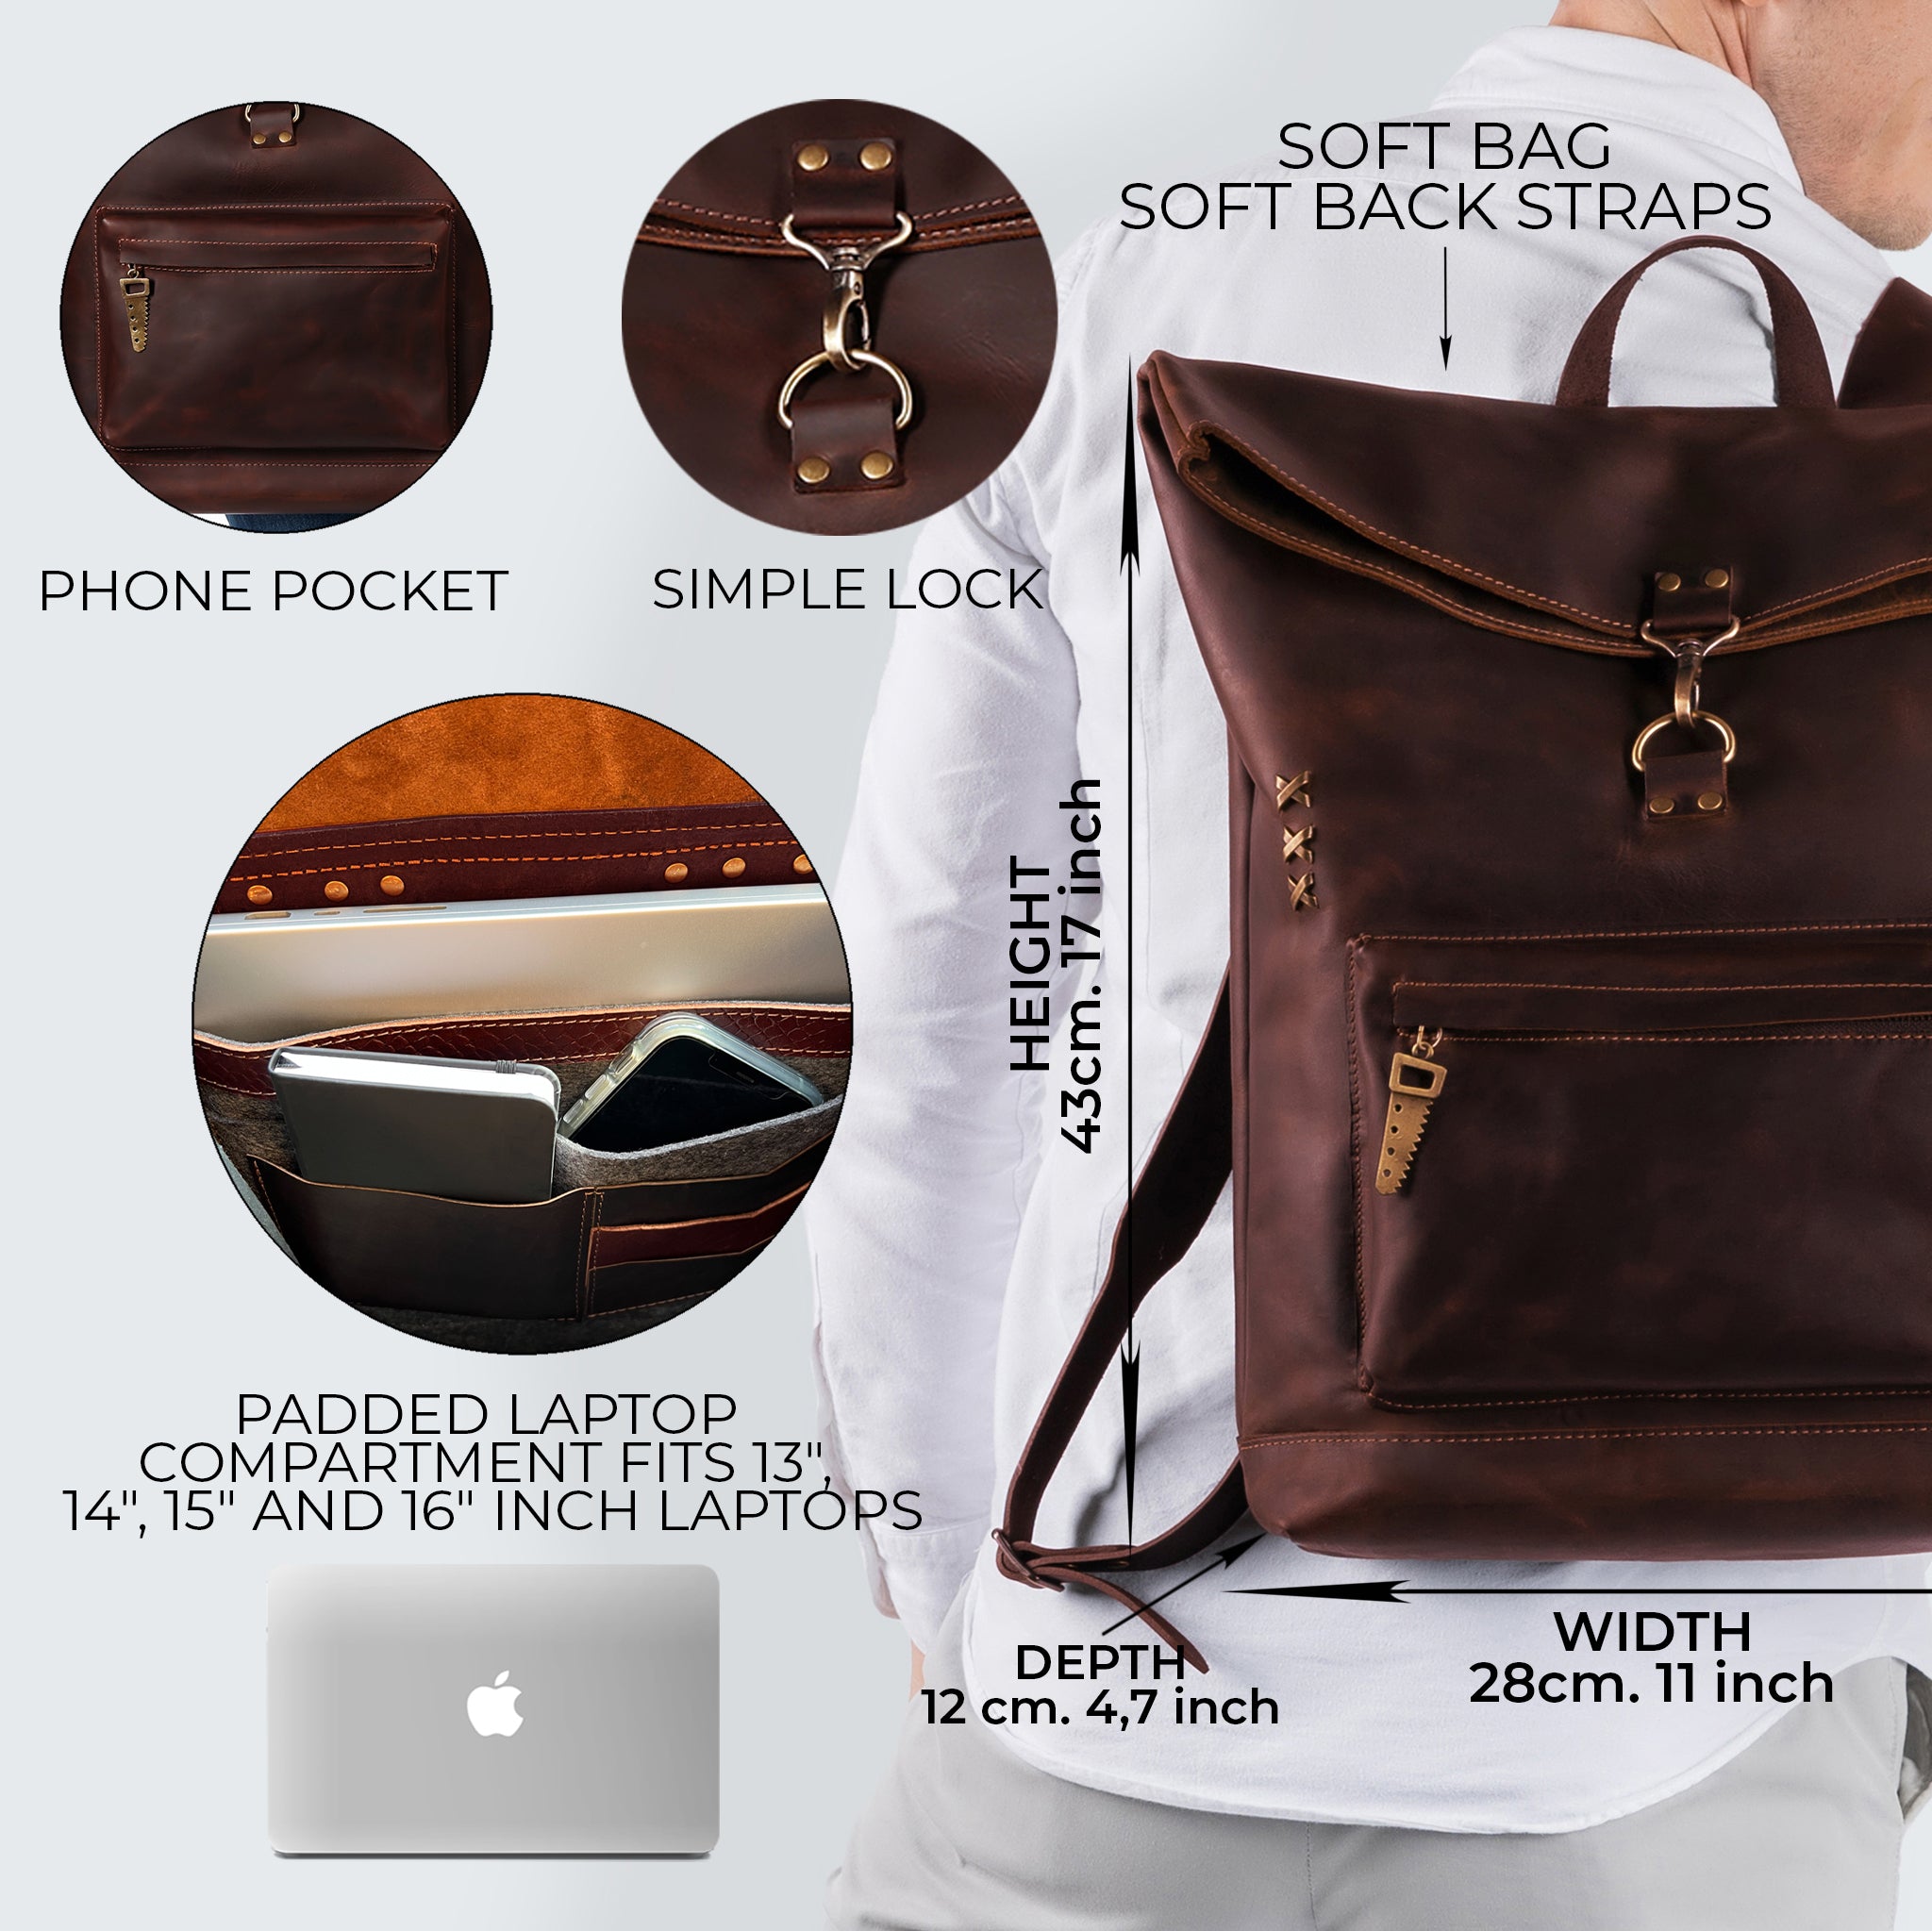 Leather Backpack - Forester